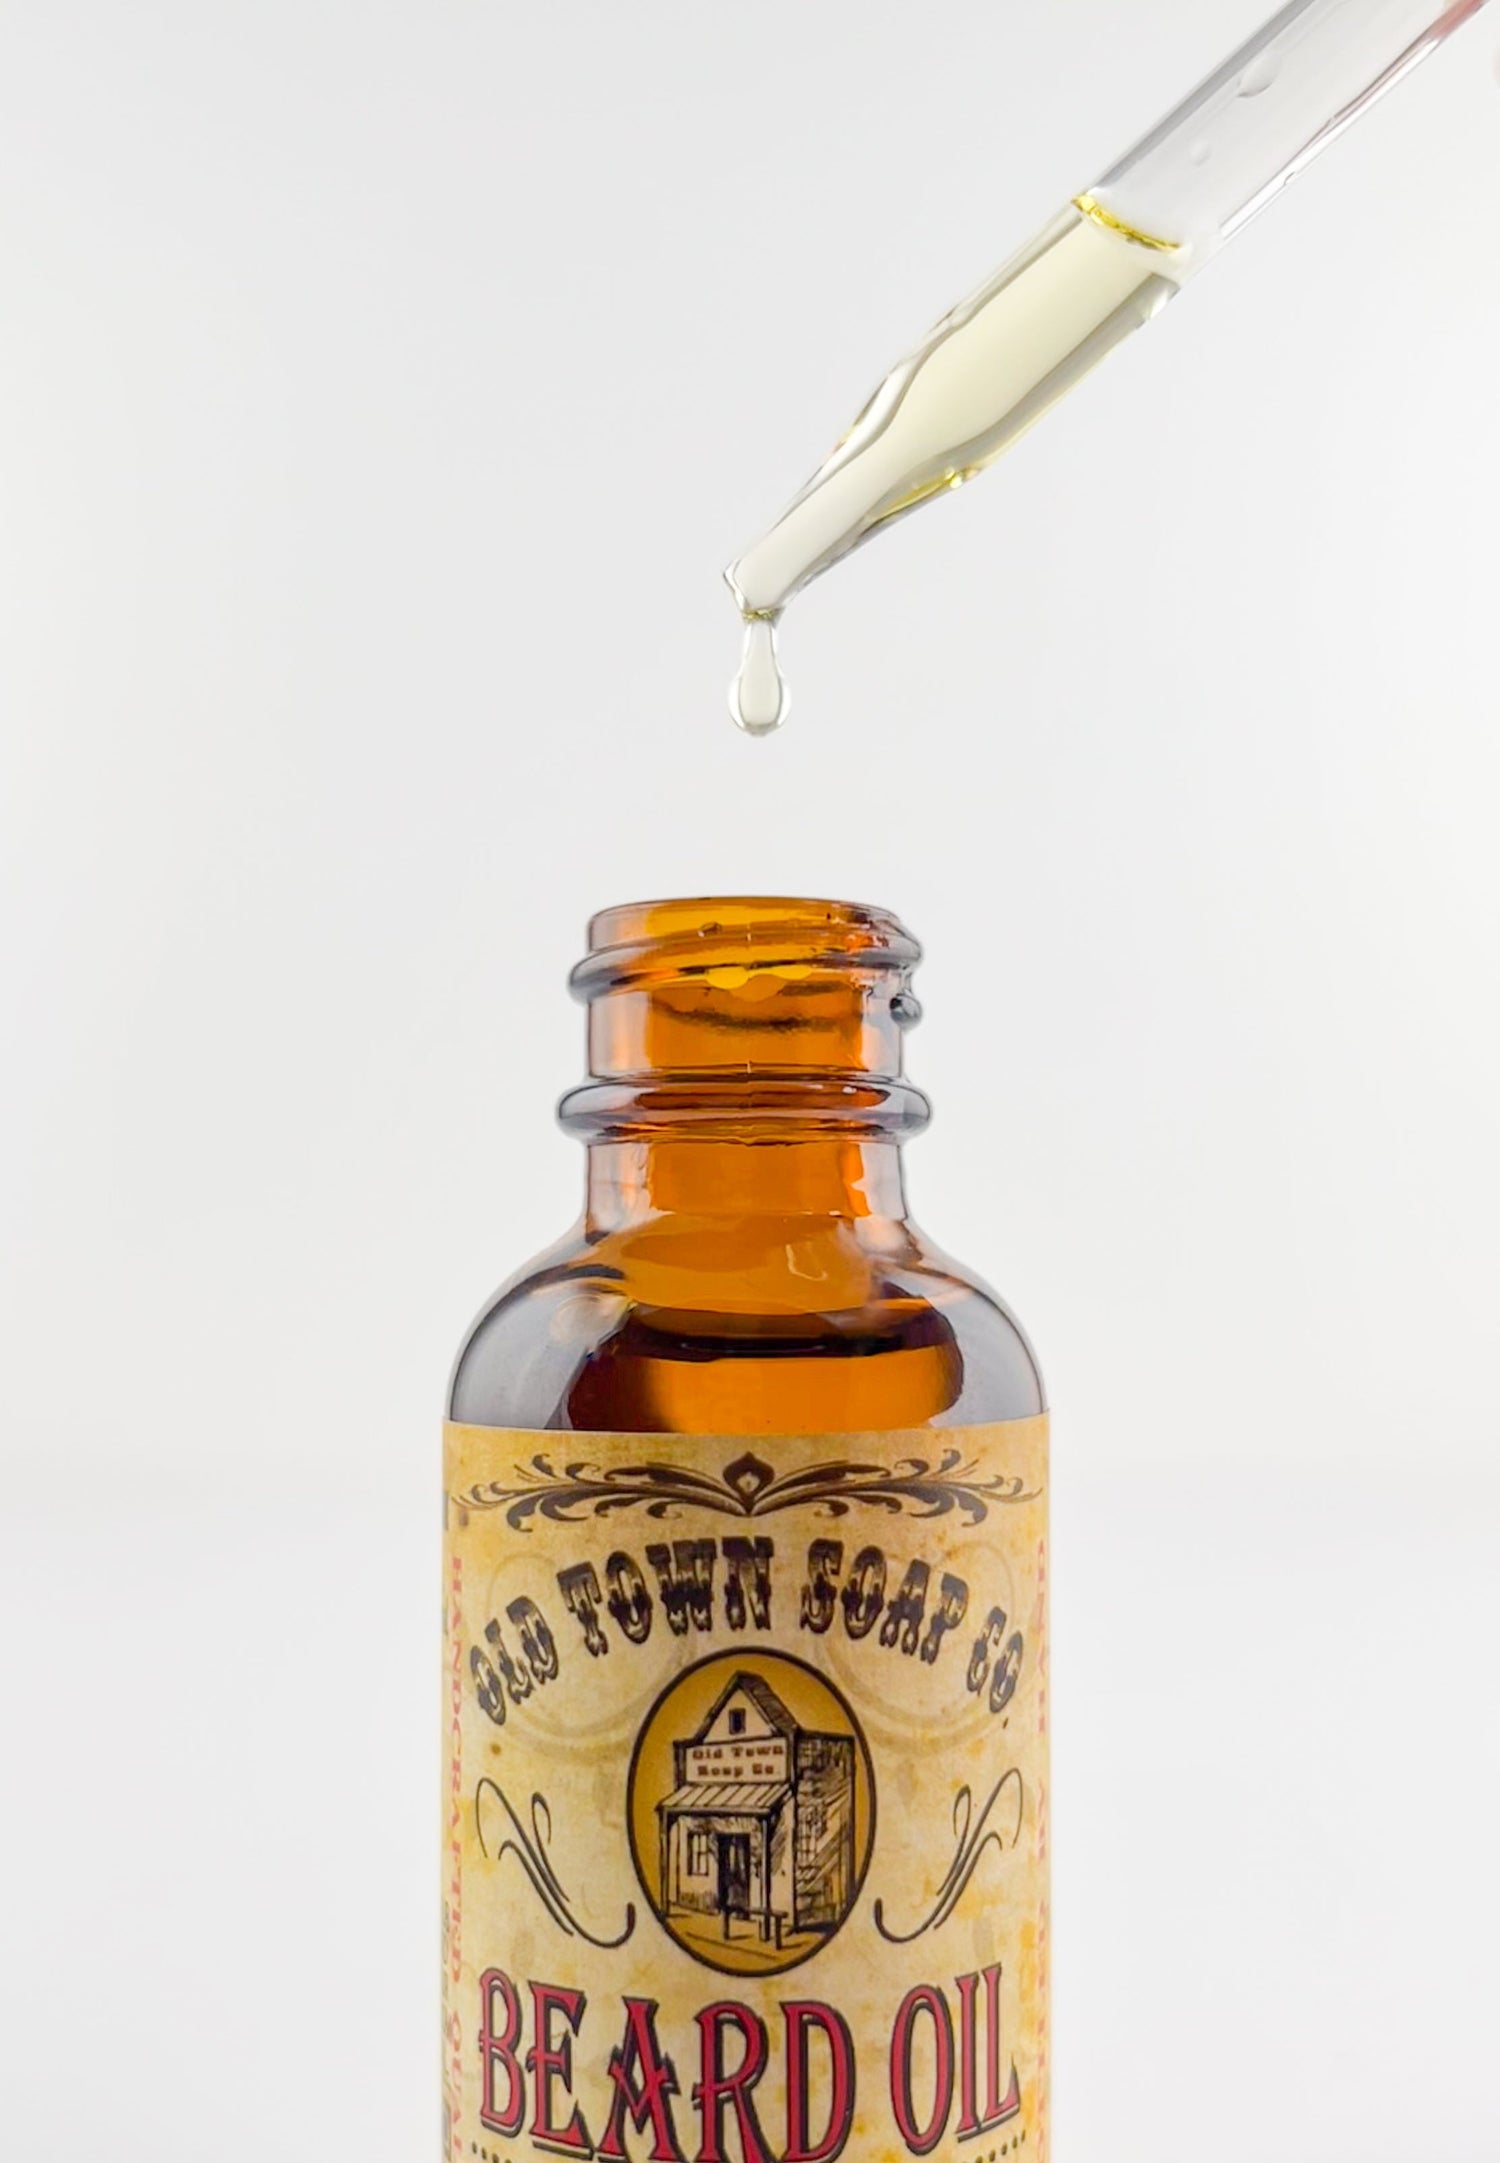 The Hunter Beard Oil - Old Town Soap Co.